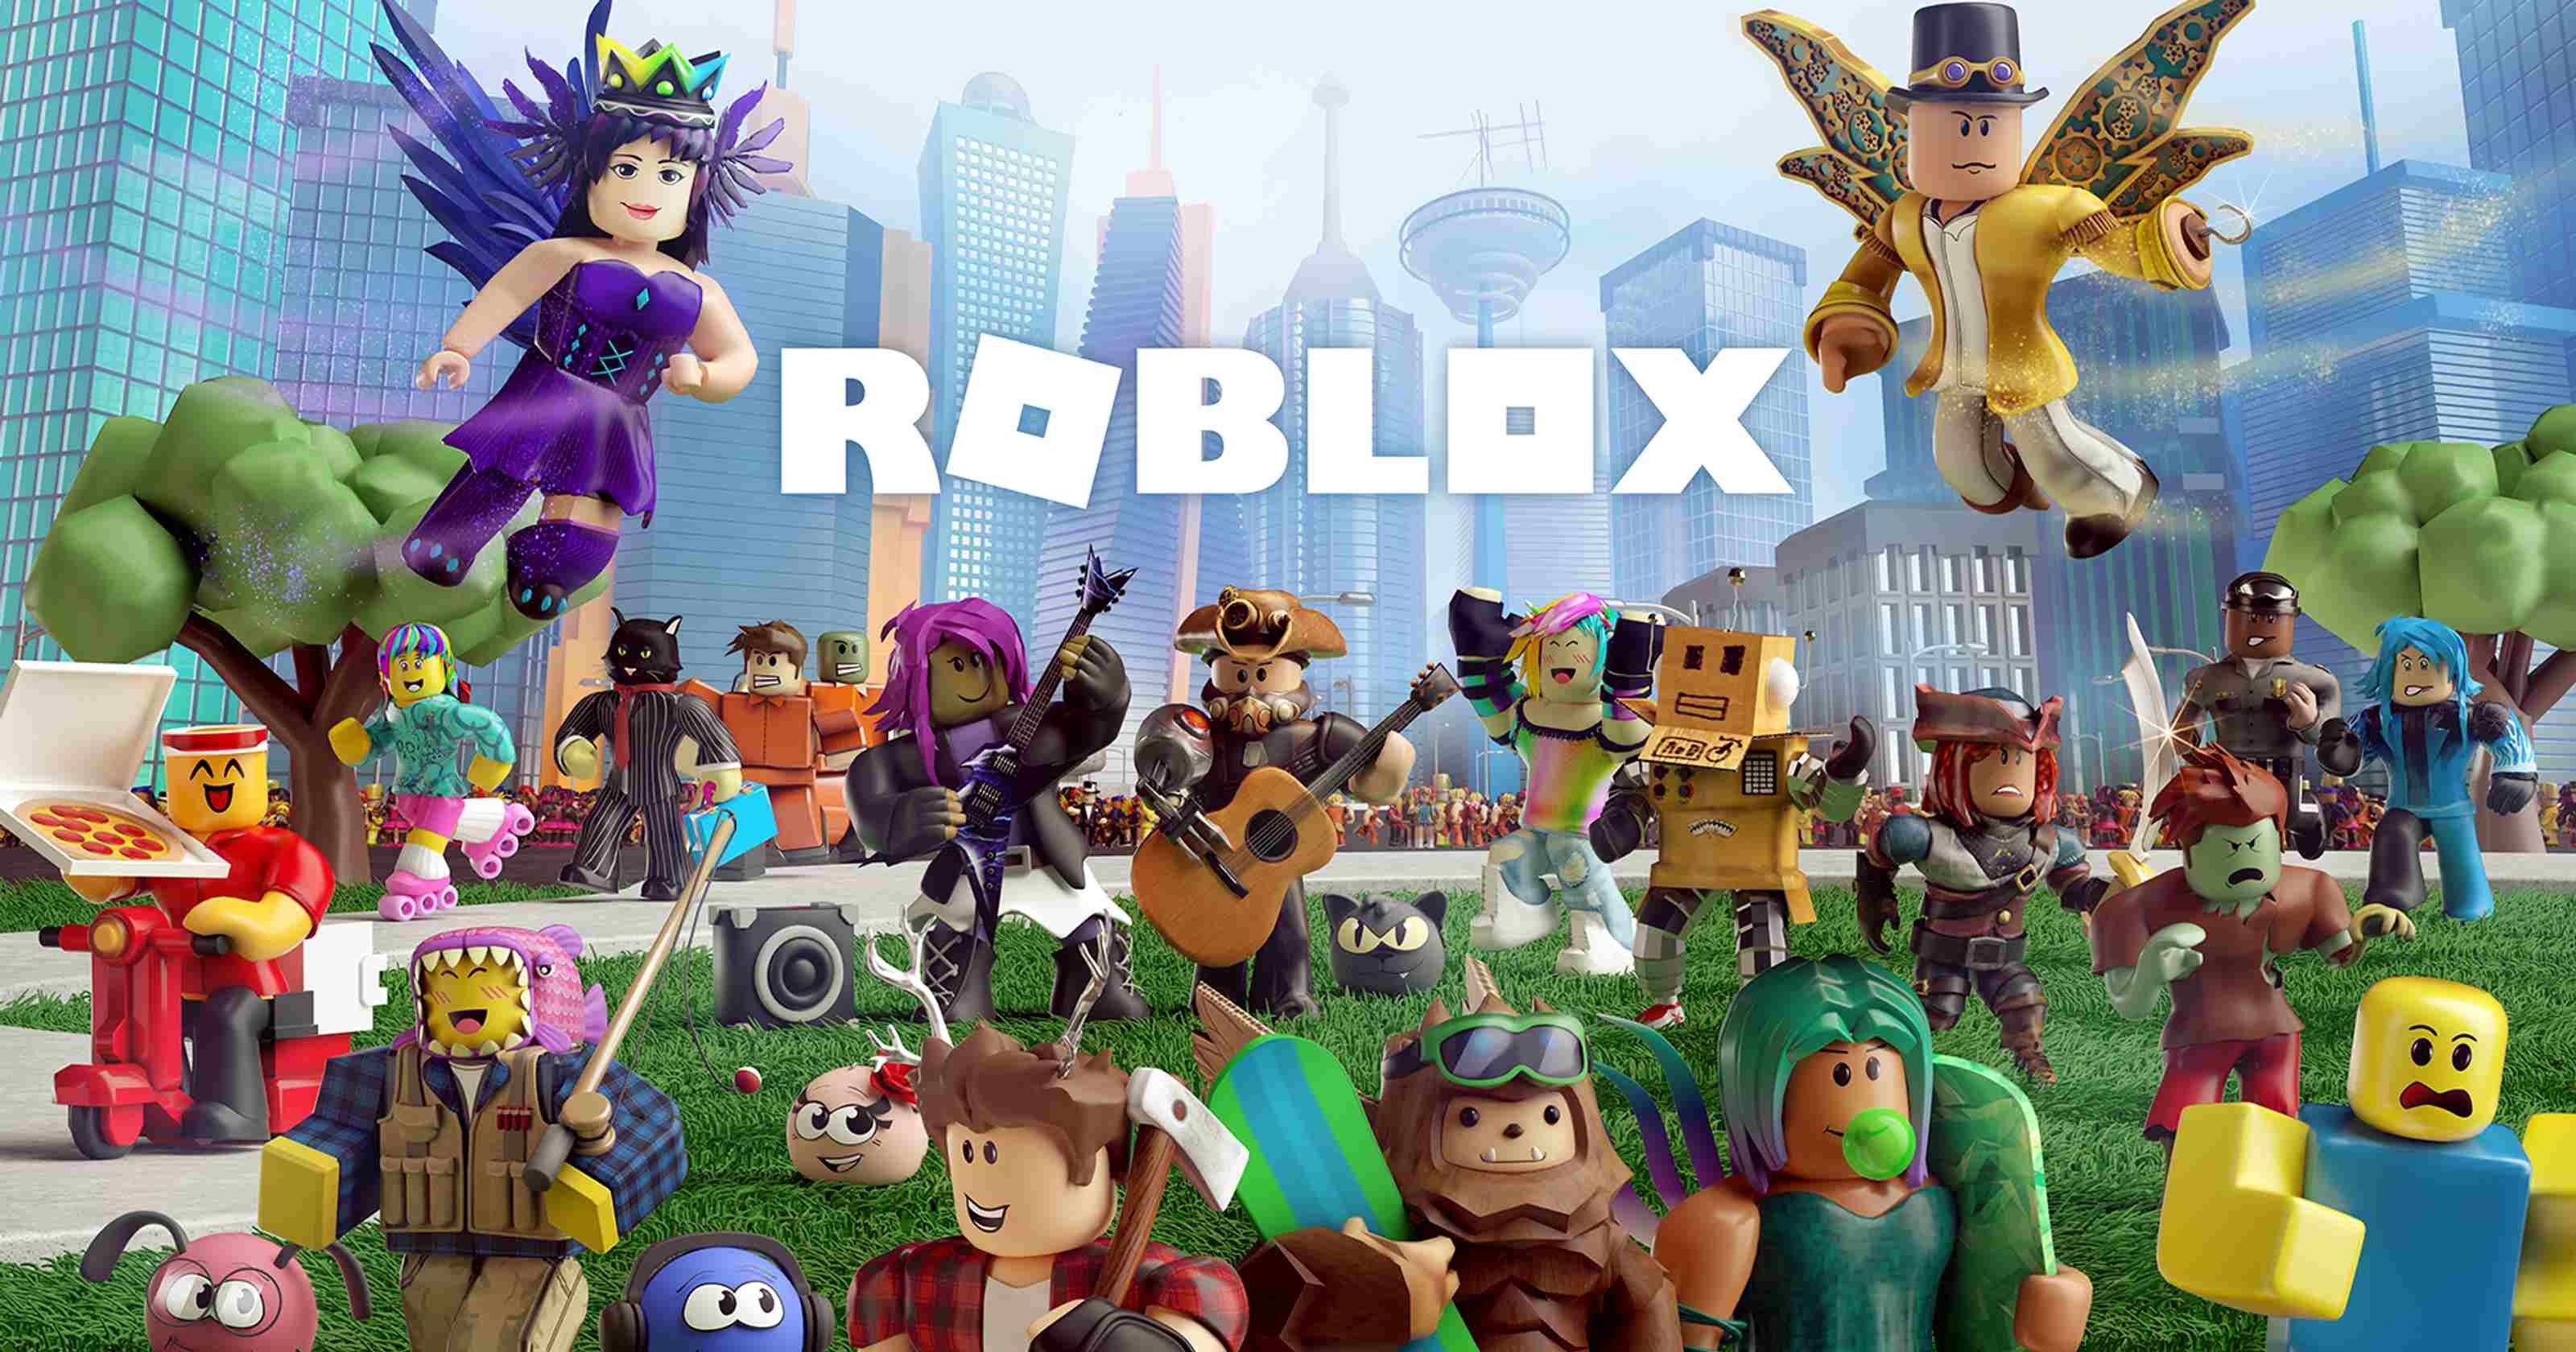 Roblox HD Wallpapers - Top Free Roblox ...